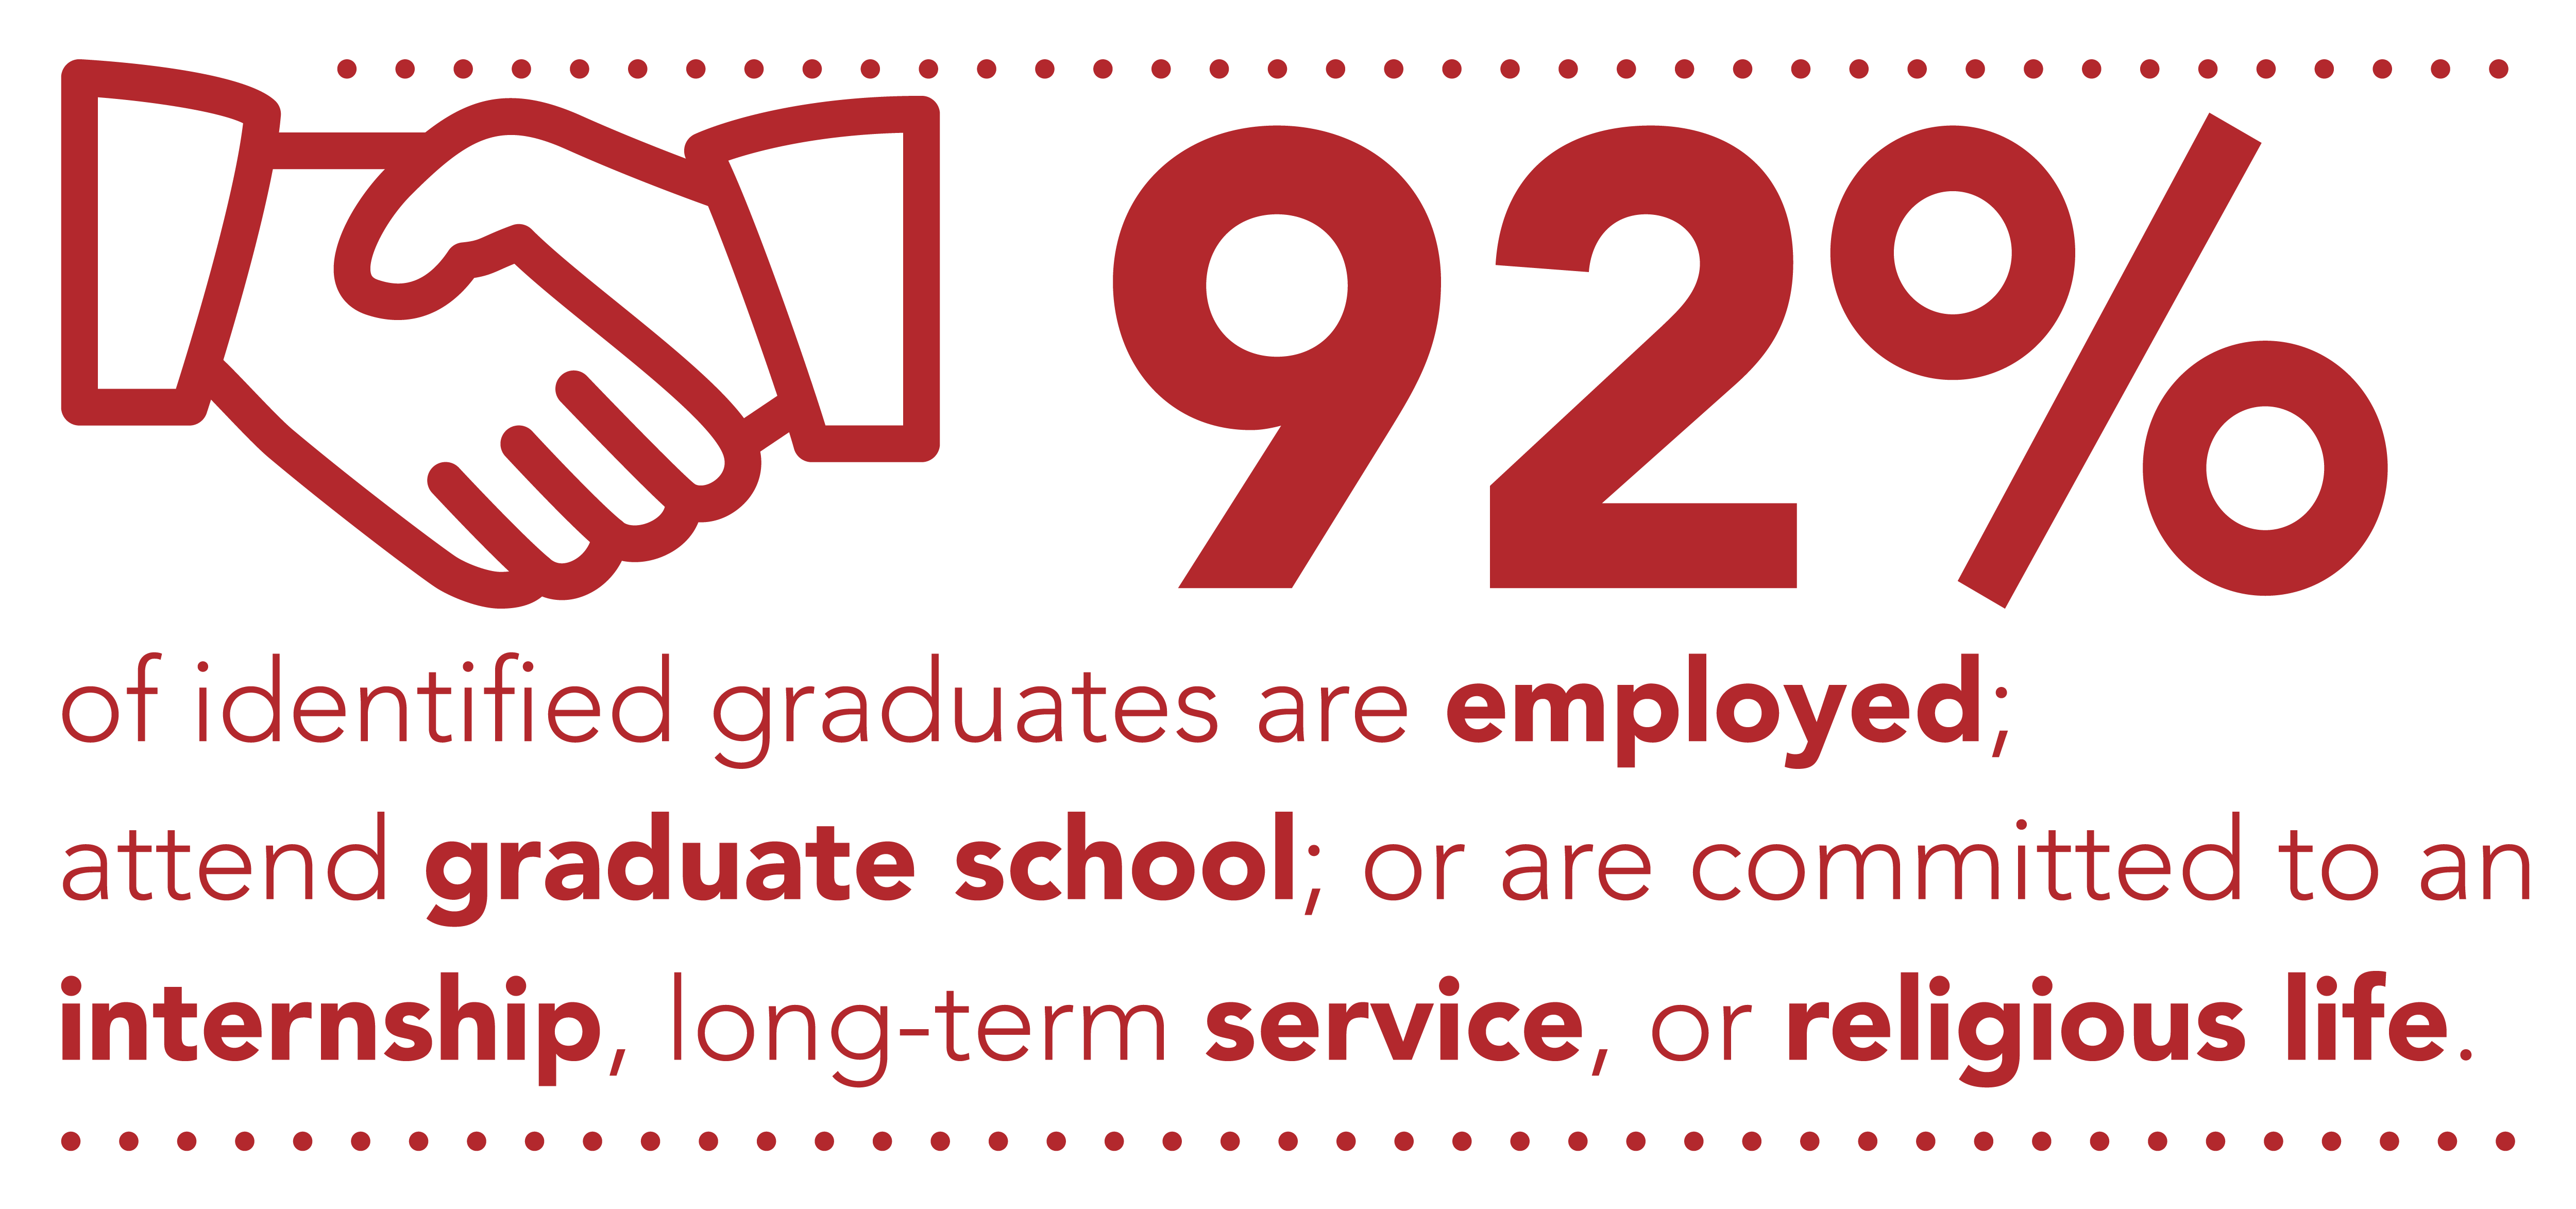 92% of identified graduates are employed; attend graduate school; or are committed to an internship, long-term service, or religious life. 66% are employed, 16% attend graduate school, 5% are employed and attend graduate school, 5% are committed to internships, long-term service, or are a member of a religious community. Outcome information was gathered on 559 graduates.